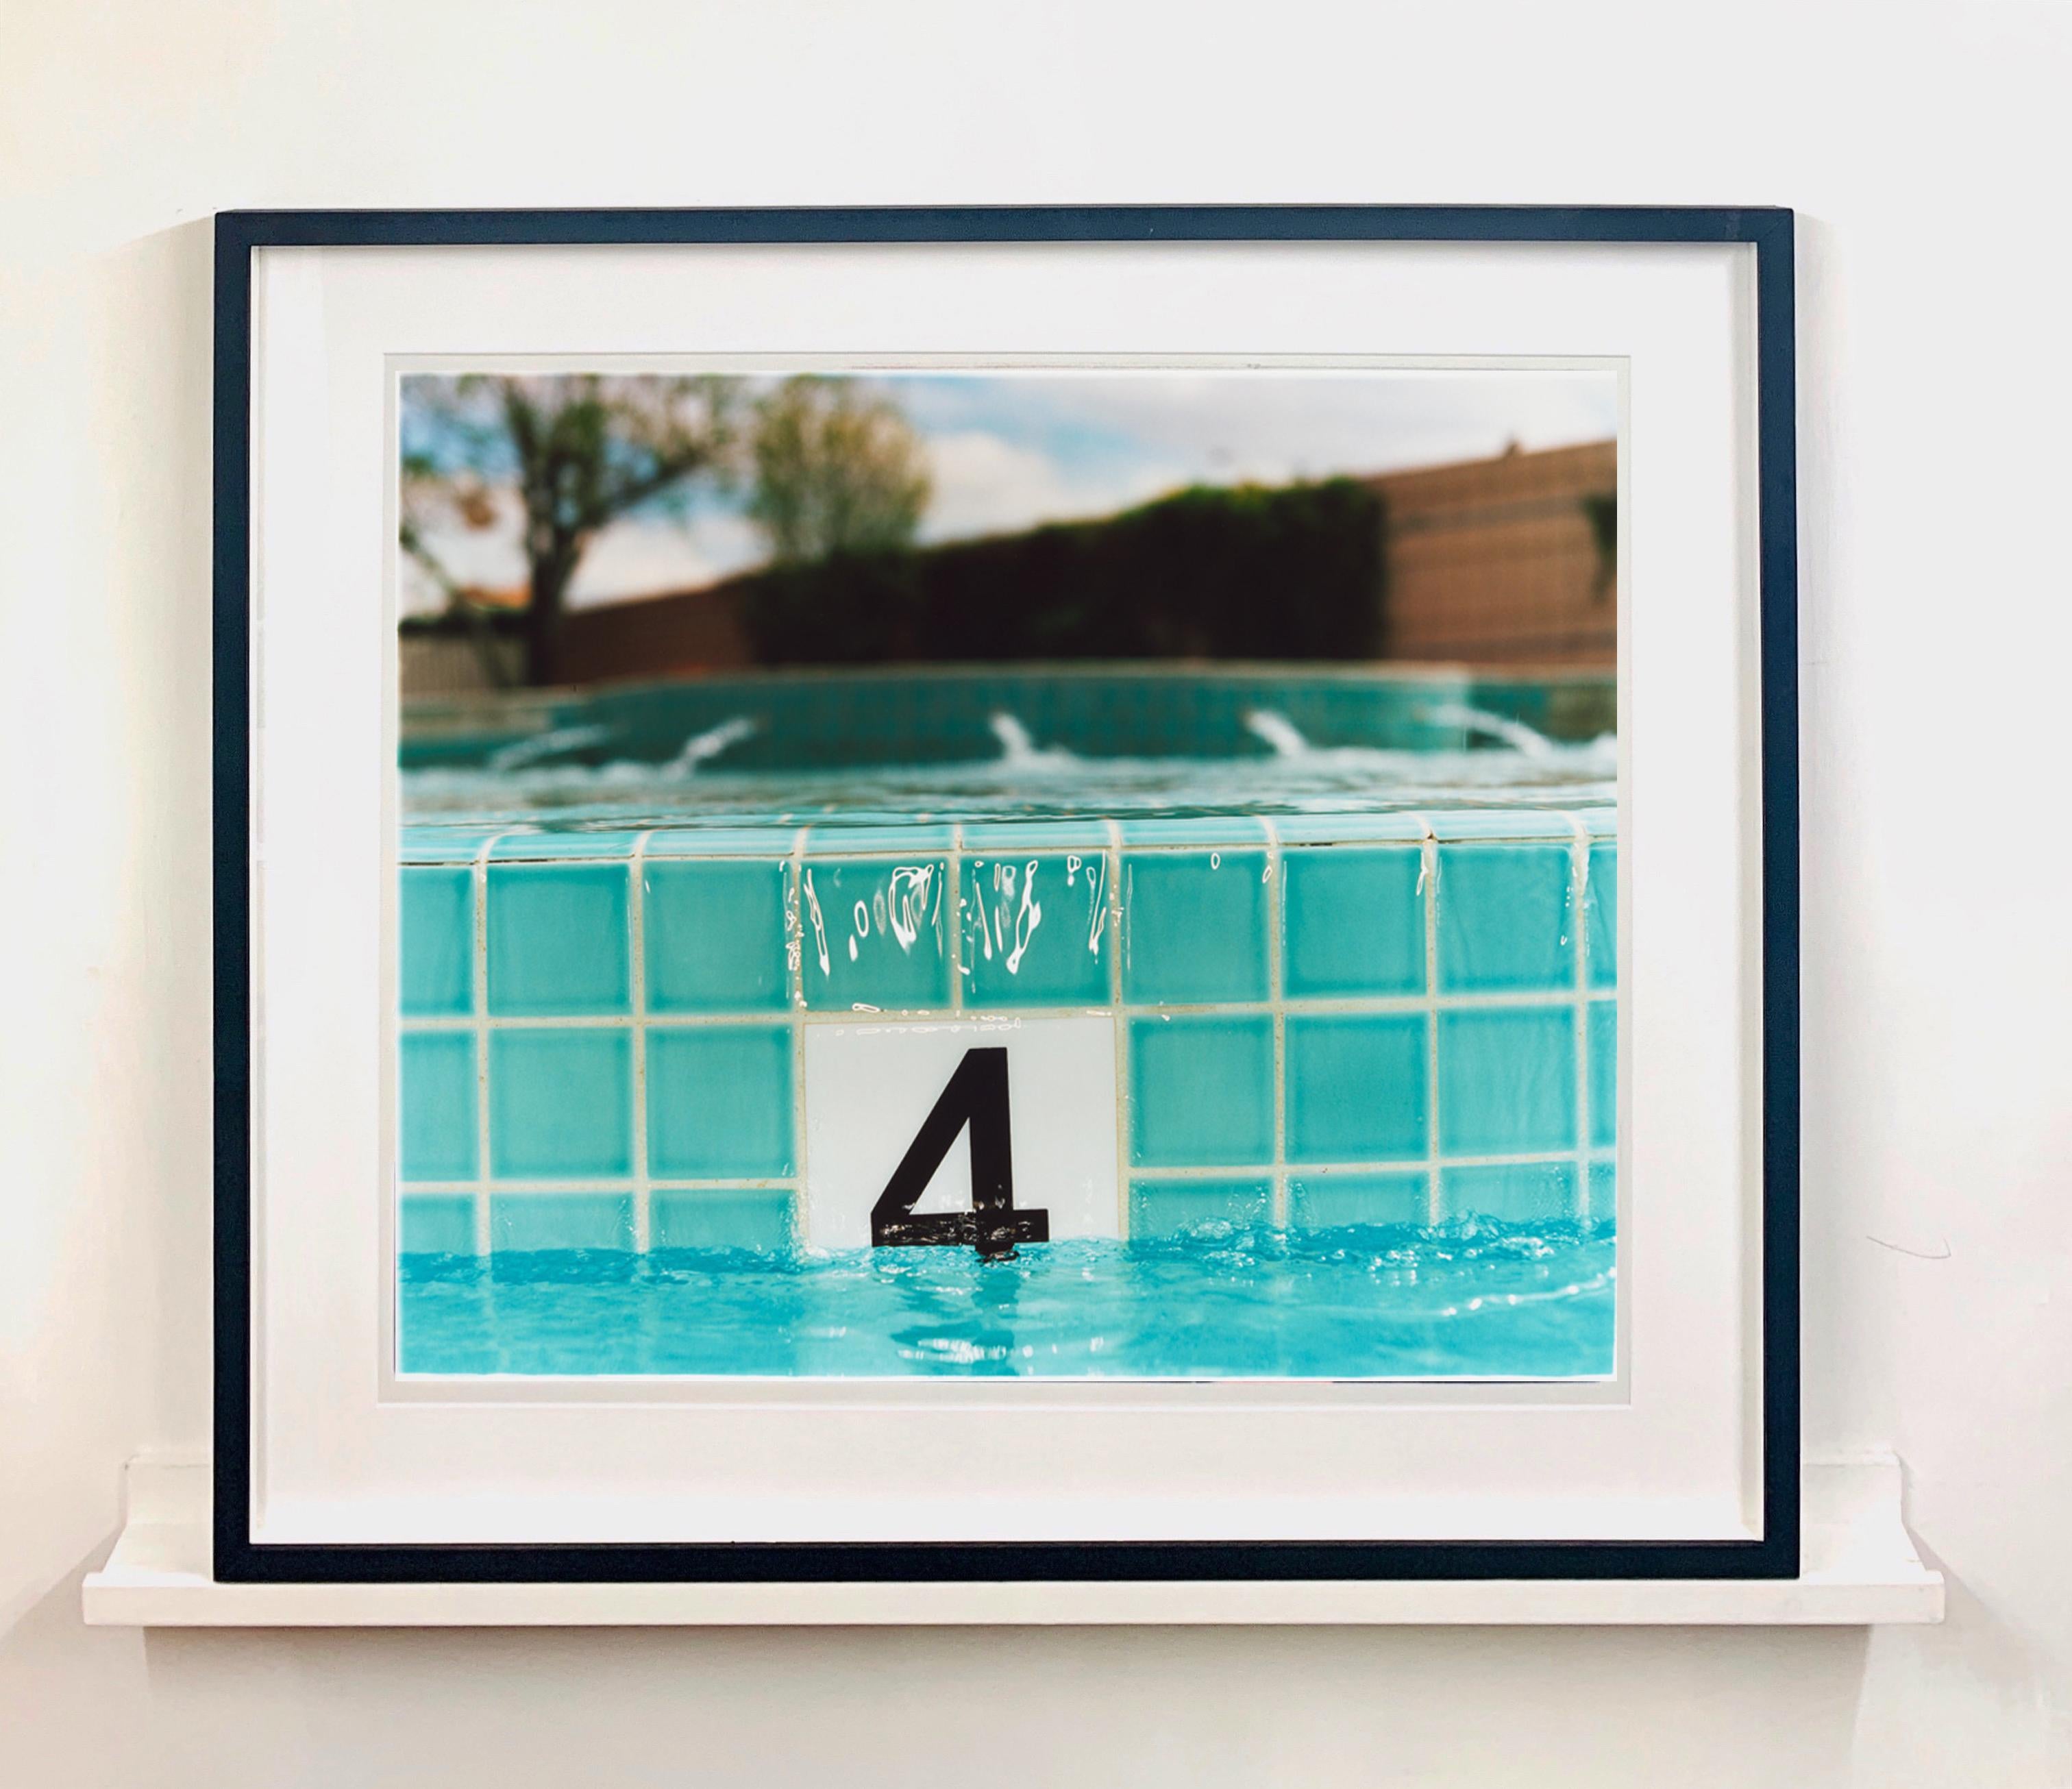 4FT, photographed at a swimming pool in Las Vegas, part of Richard Heeps 'Dream in Colour' Series. The pop of blue colour

This artwork is a limited edition of 25, gloss photographic print, dry-mounted to aluminium, it is presented in a museum board